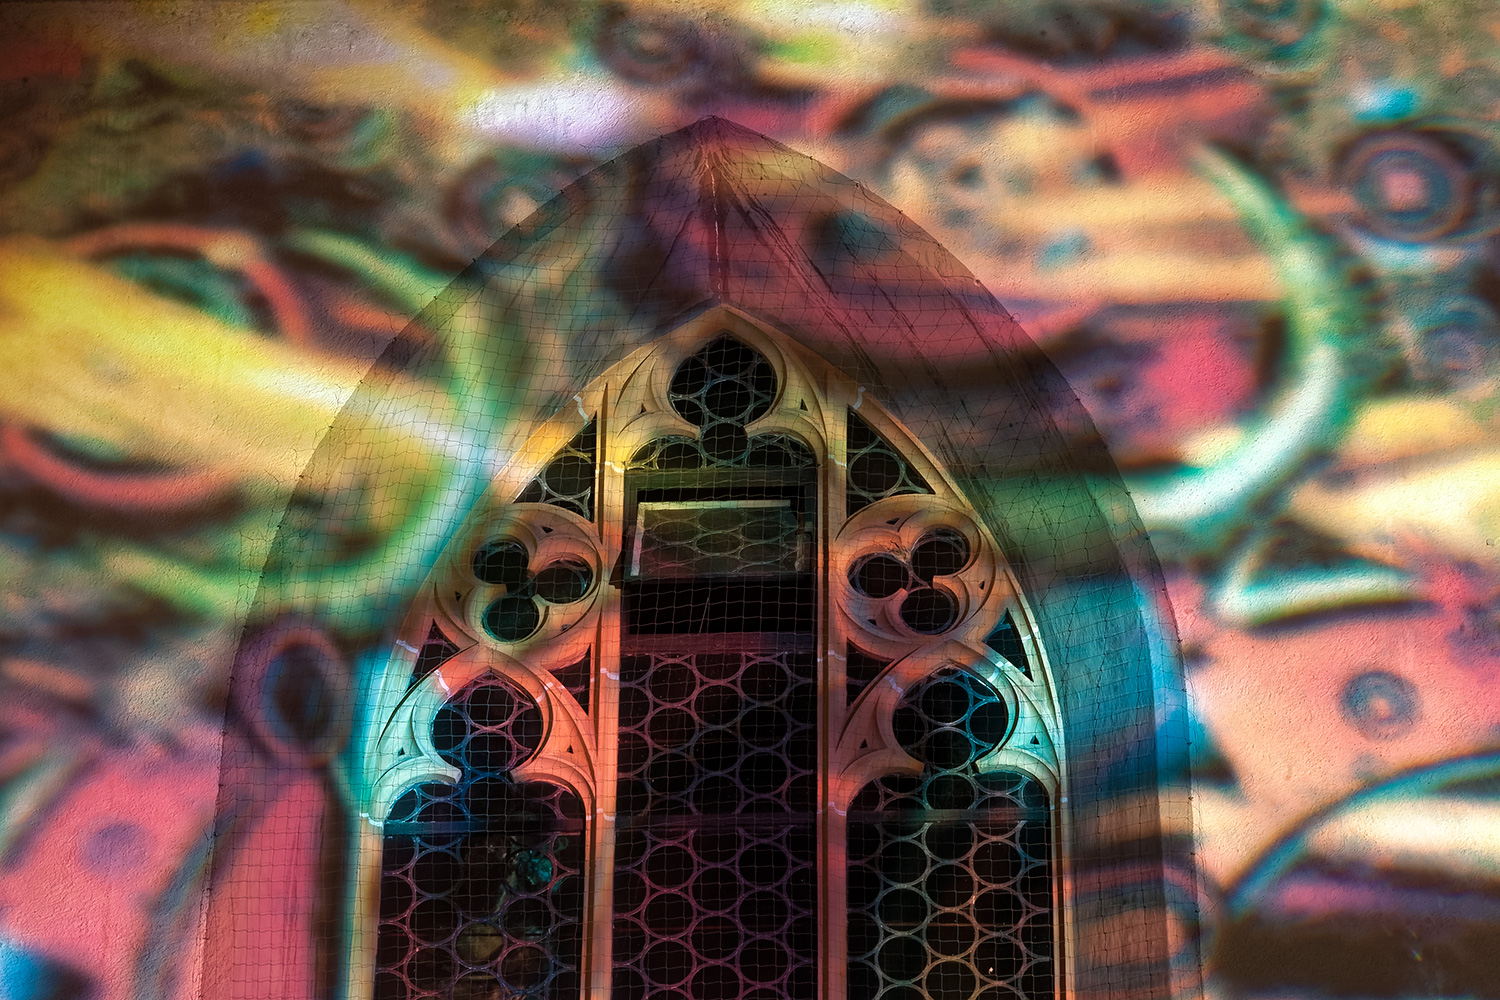 Colourful Mind, coloured projection towards a church wall